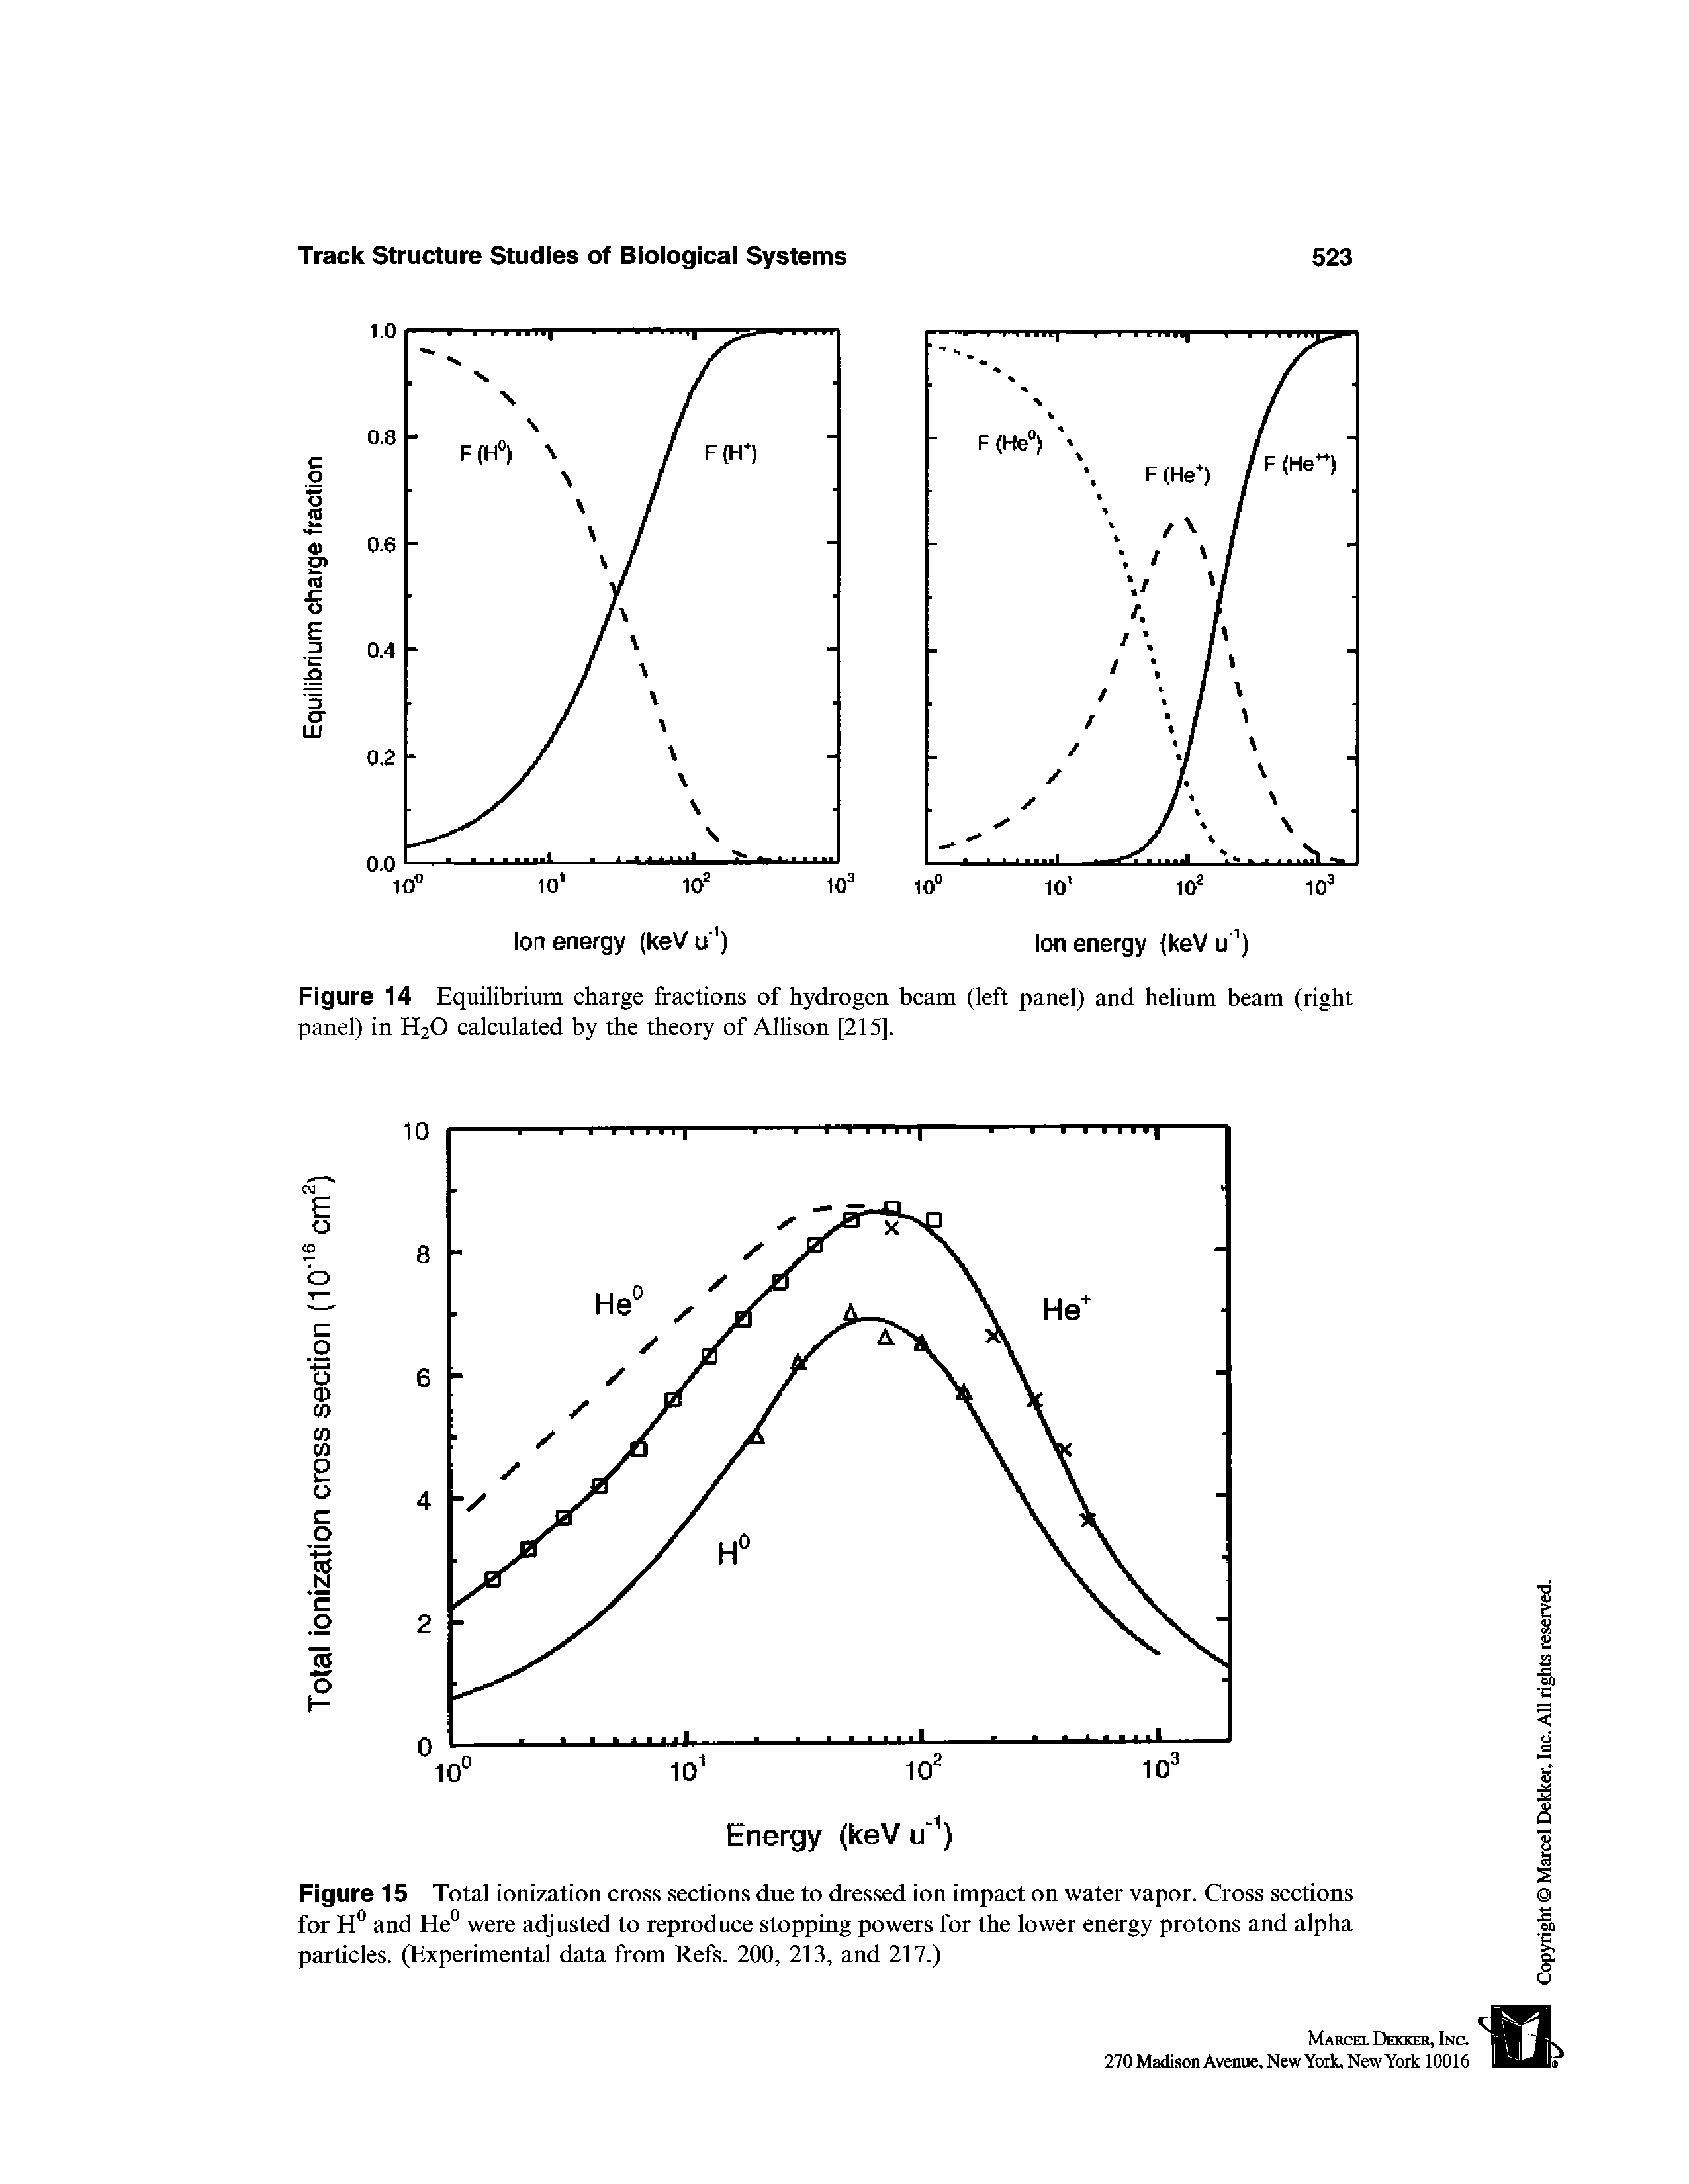 Figure 14 Equilibrium charge fractions of hydrogen beam (left panel) and helium beam (right panel) in H2O calculated by the theory of Allison [215].